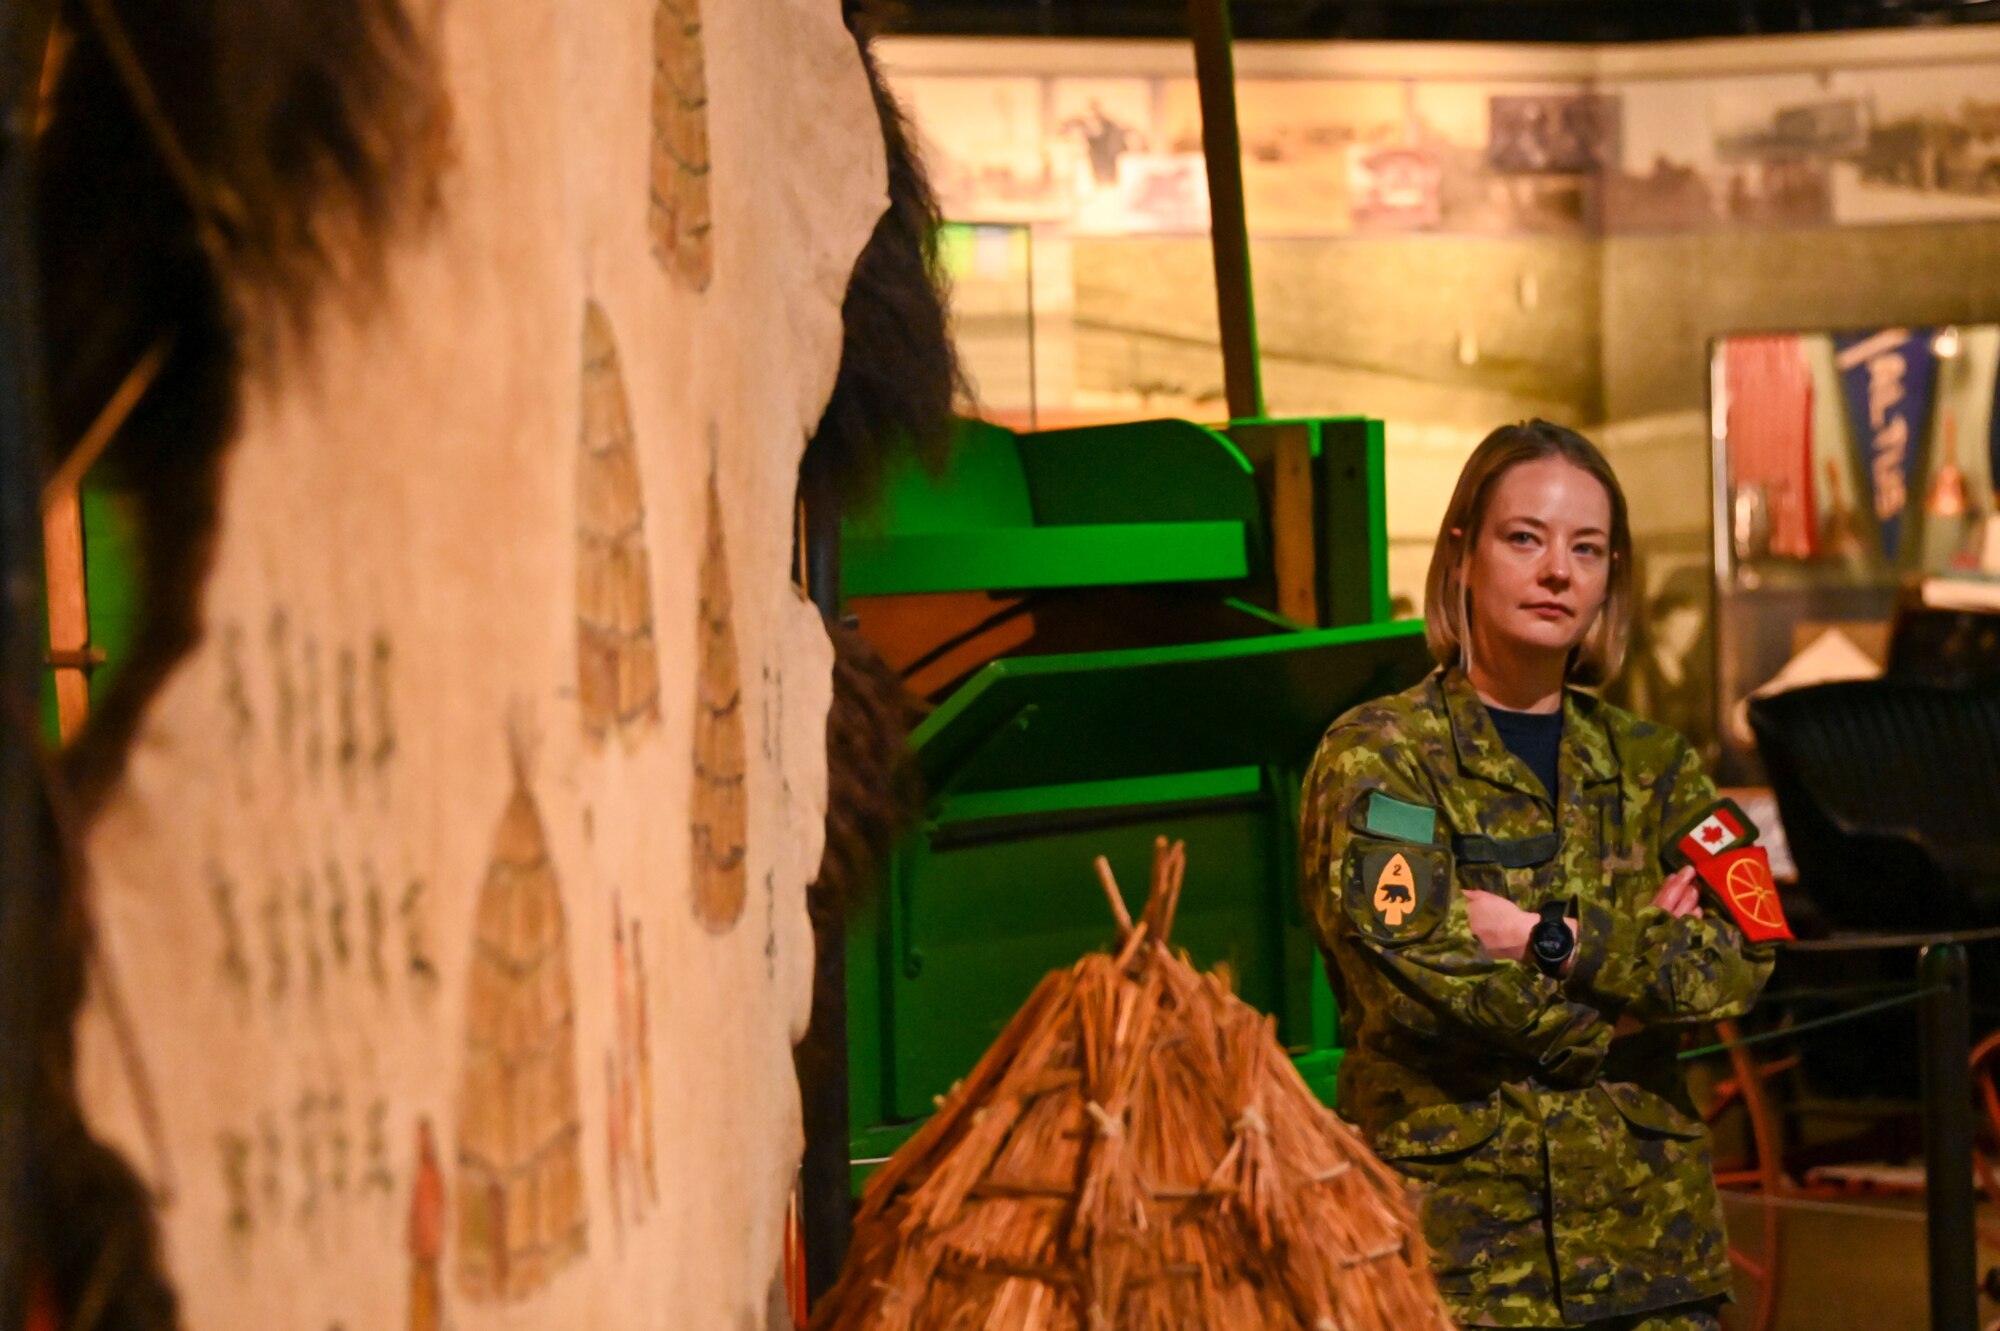 Royal Canadian air force Cpl. Emily Mountney-Lessard, 2nd Service Battalion traffic technician, poses near a buffalo hide painting in the Museum of the Western Prairie during a tour of Altus, Oklahoma, May 19, 2023. International students visited several places in Southwestern Oklahoma during their time at Altus Air Force Base, Oklahoma, learning more about American culture. (U.S. Air Force photo by Senior Airman Kayla Christenson)